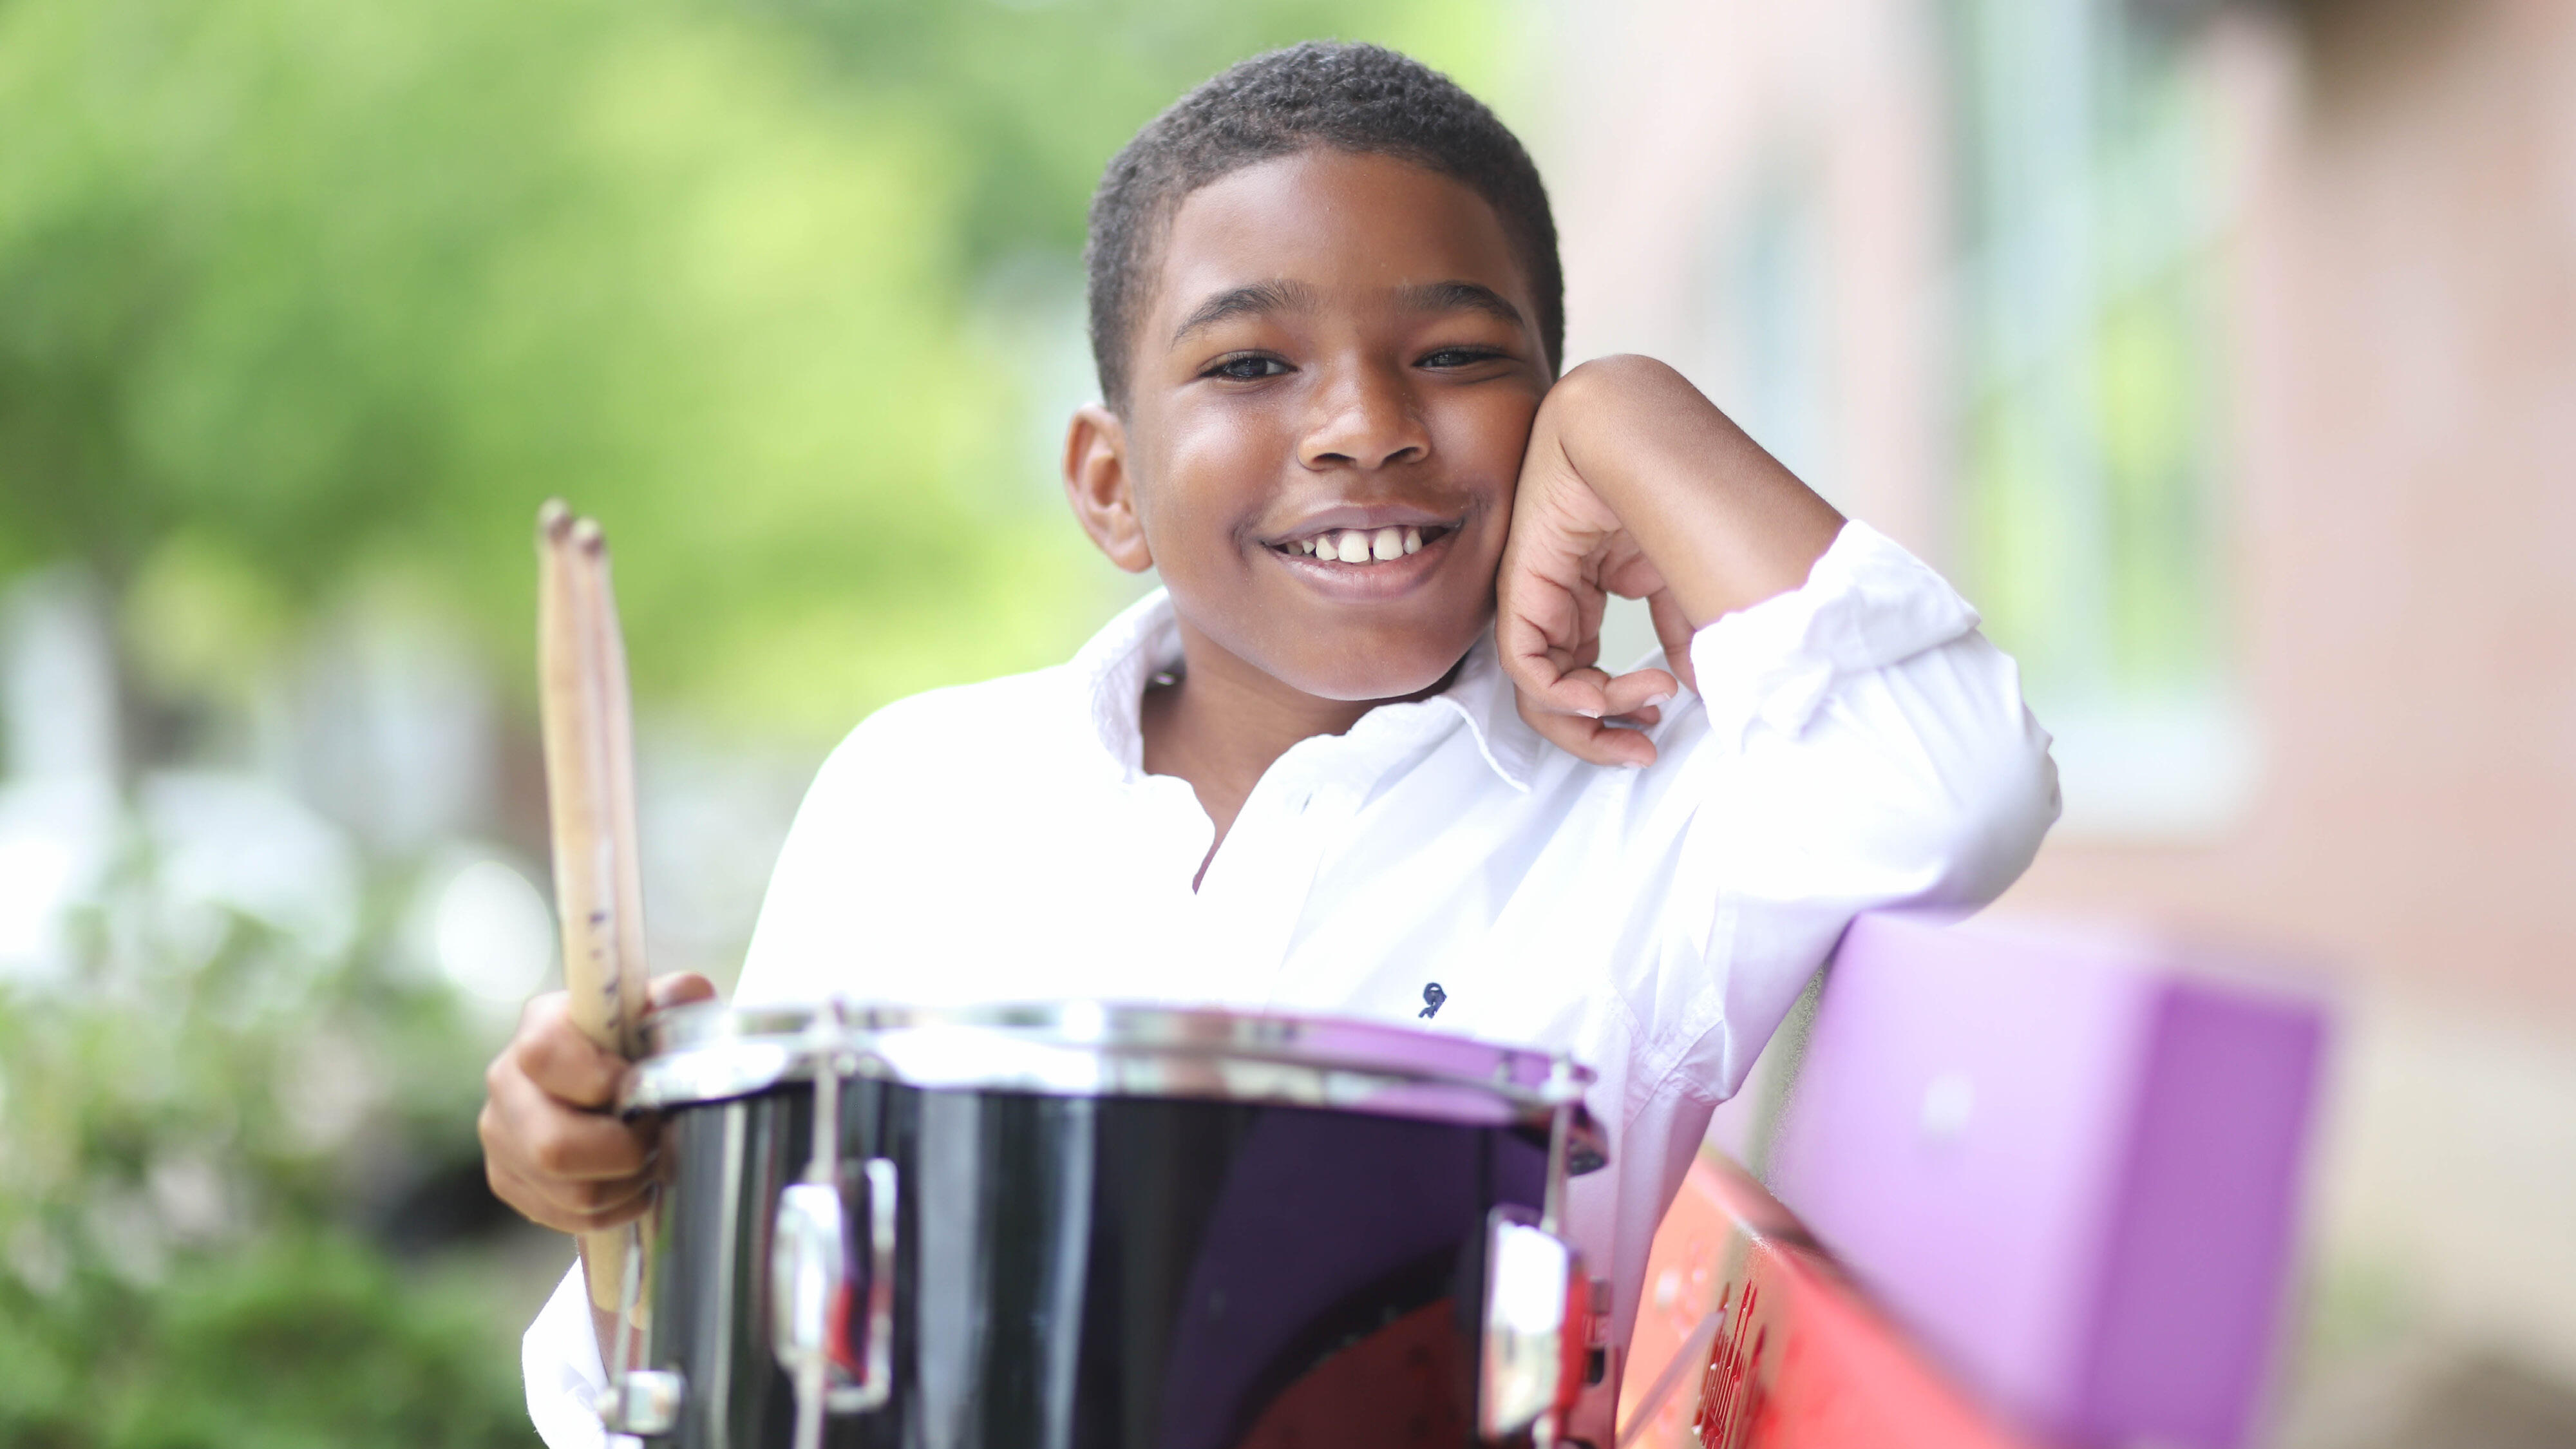 Student smiling and holding a snare drum on a bench